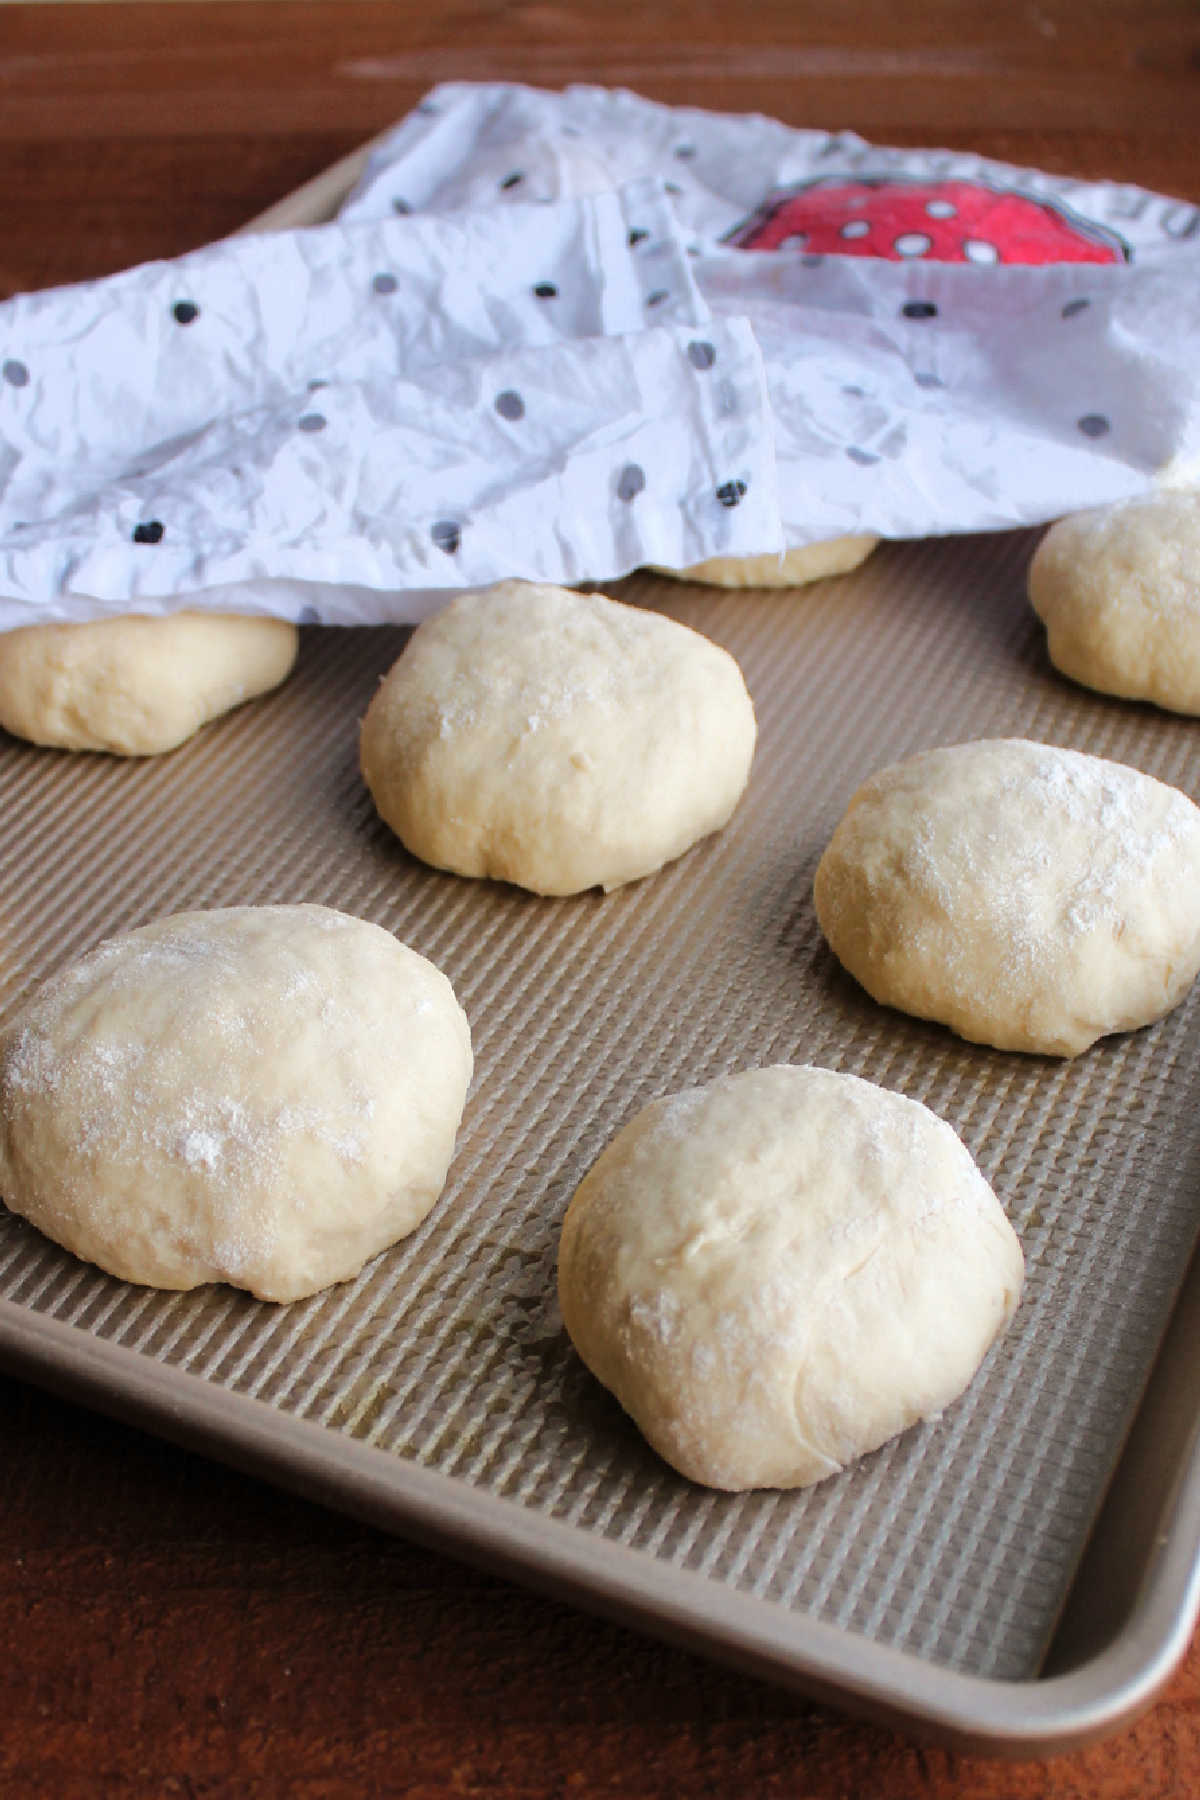 3 day roll dough formed into balls put on a greased baking sheet and covered with a towel to proof.